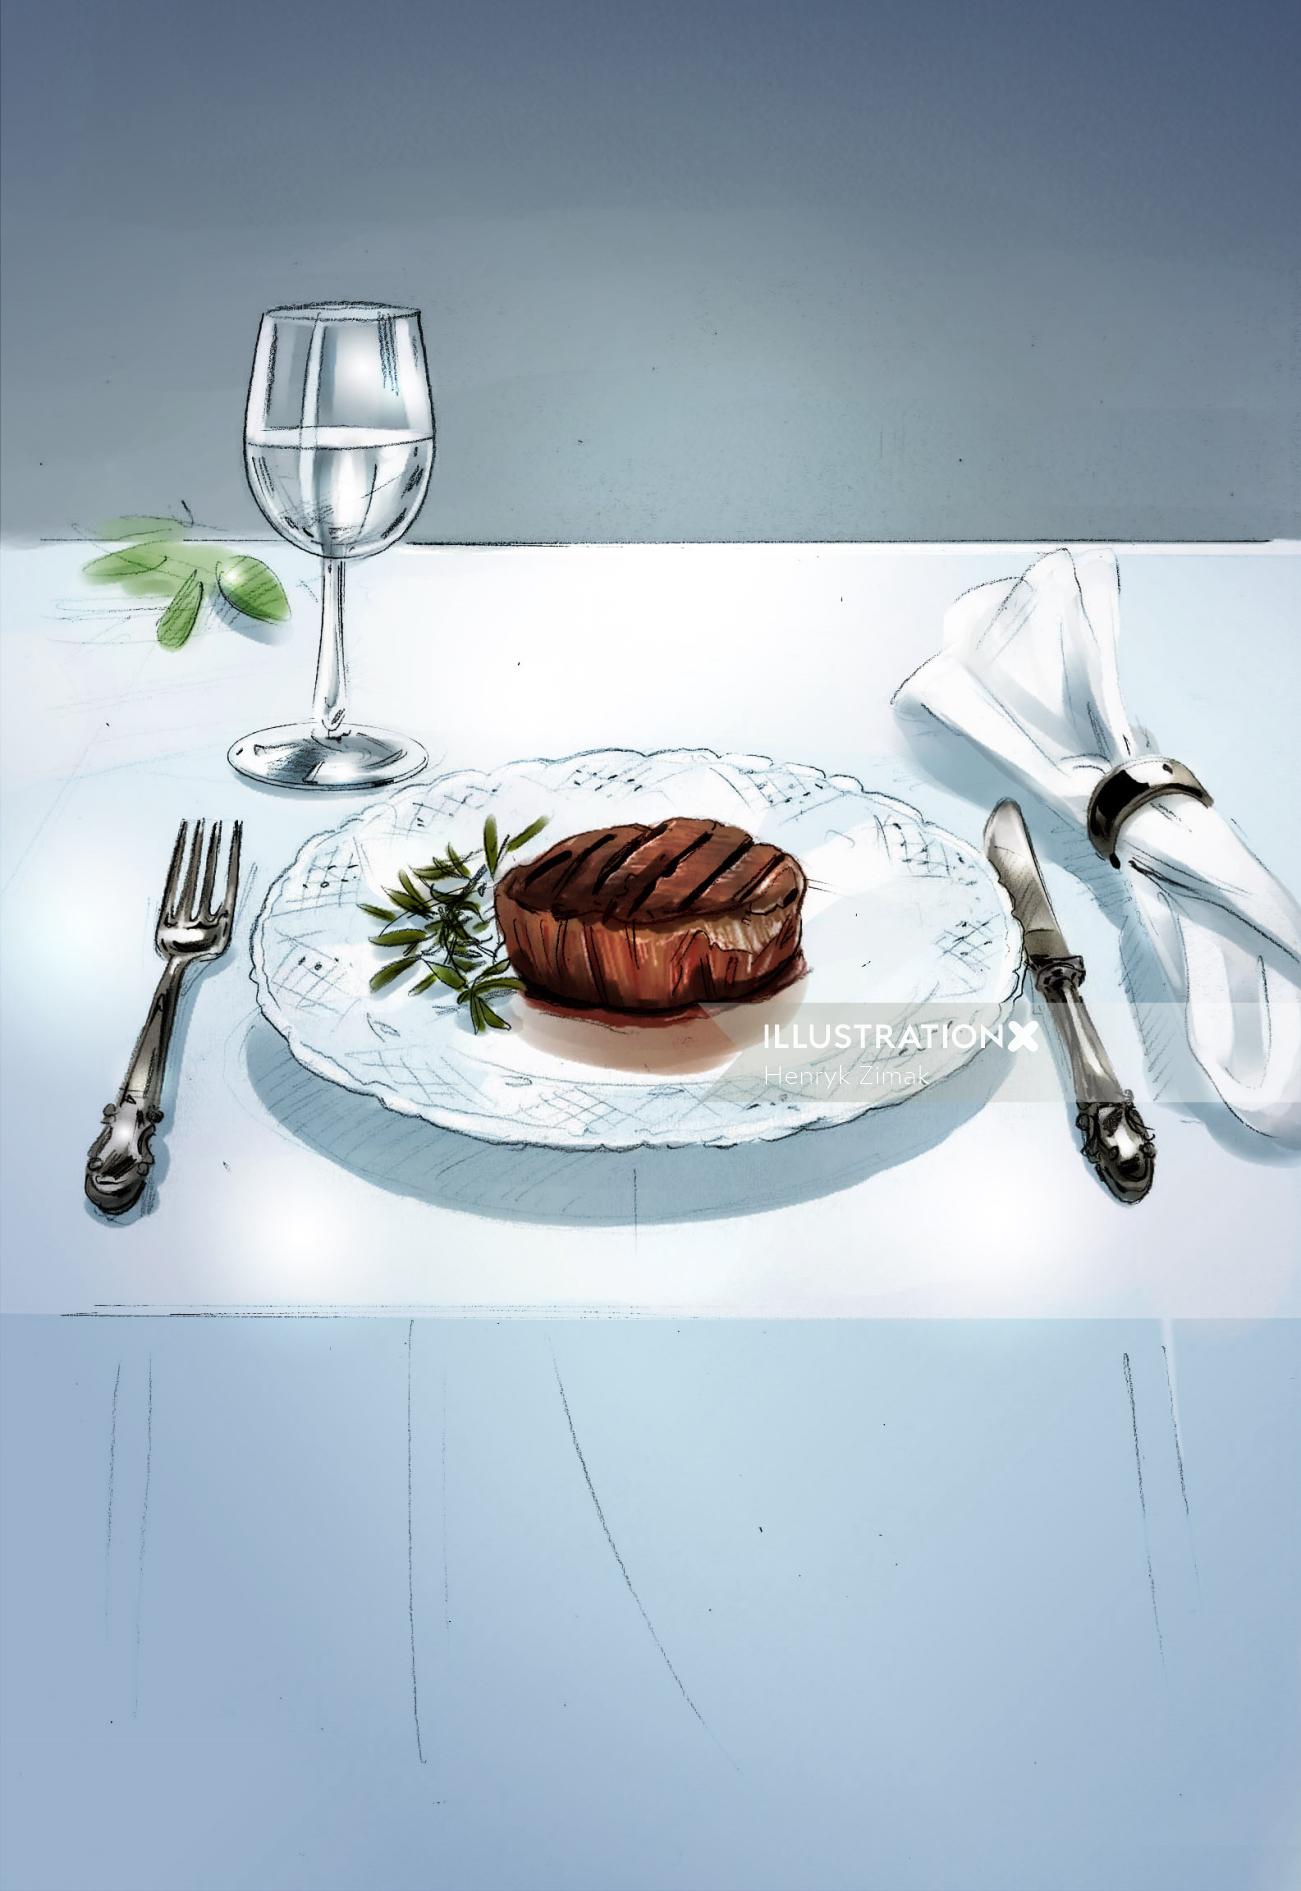 Digital painting of dining table illustration 